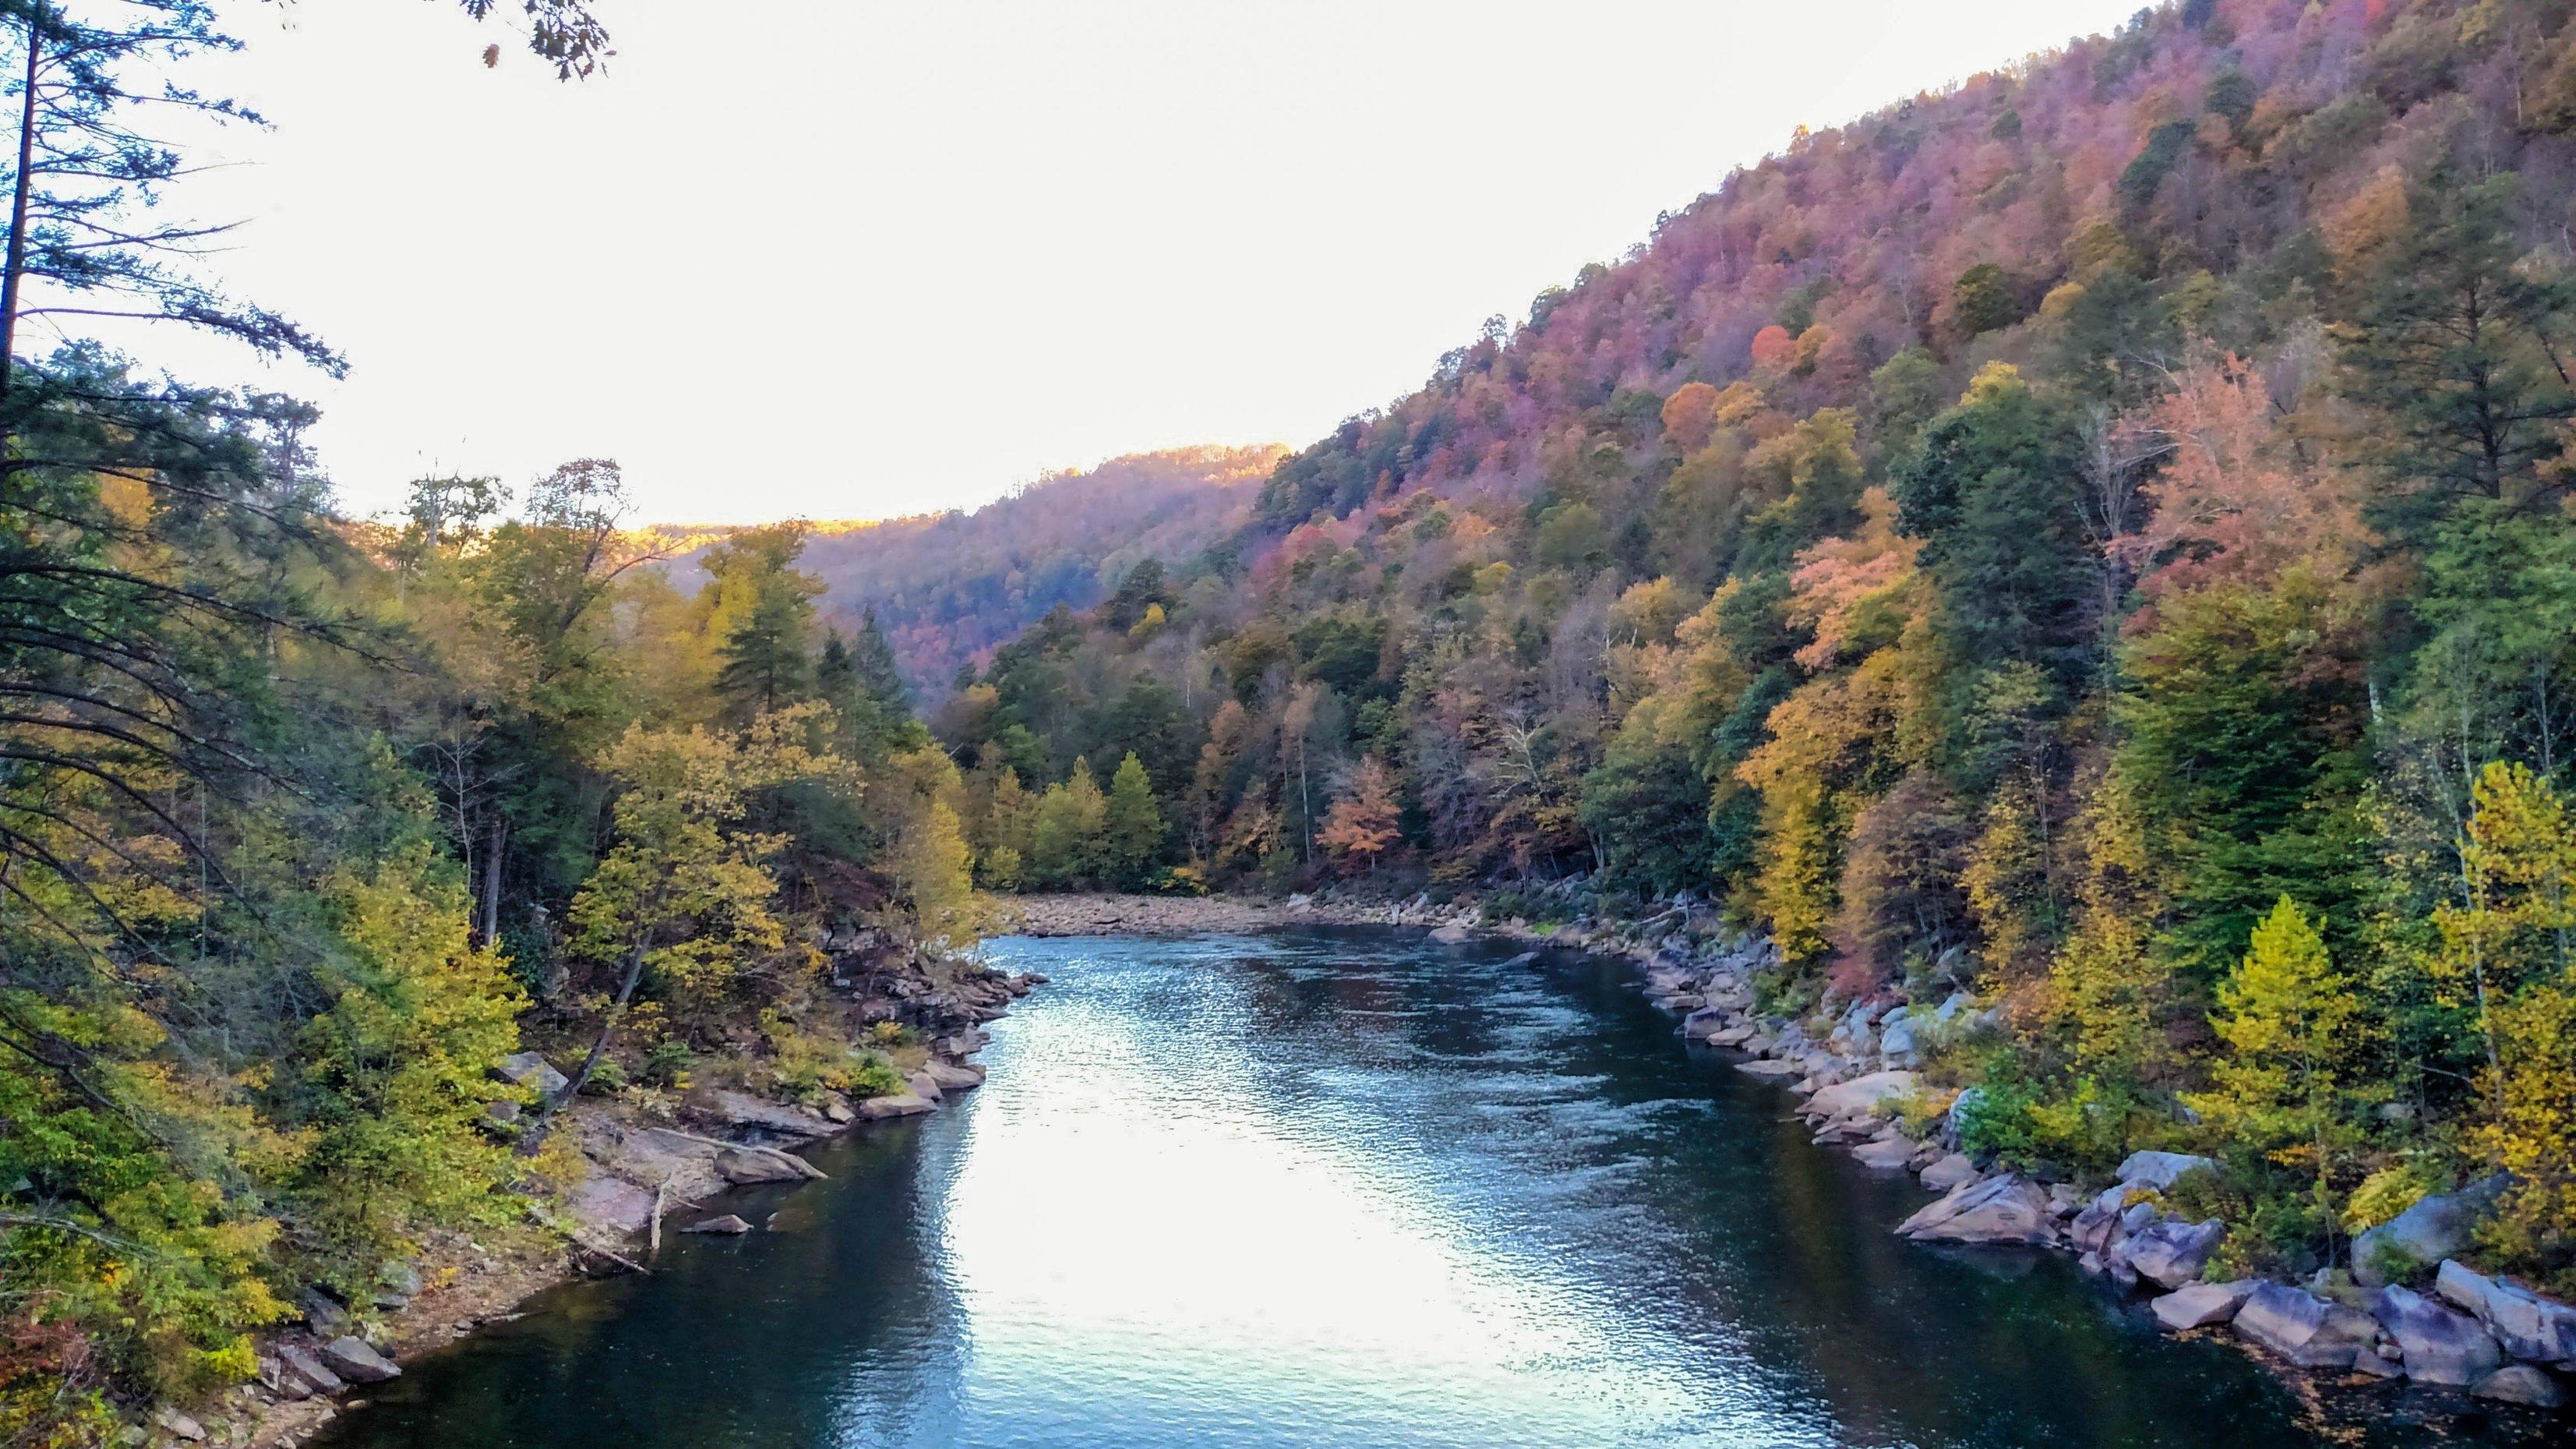 Autumn View Overlooking The Cheat River In West Virginia - West Virginia Hd - HD Wallpaper 